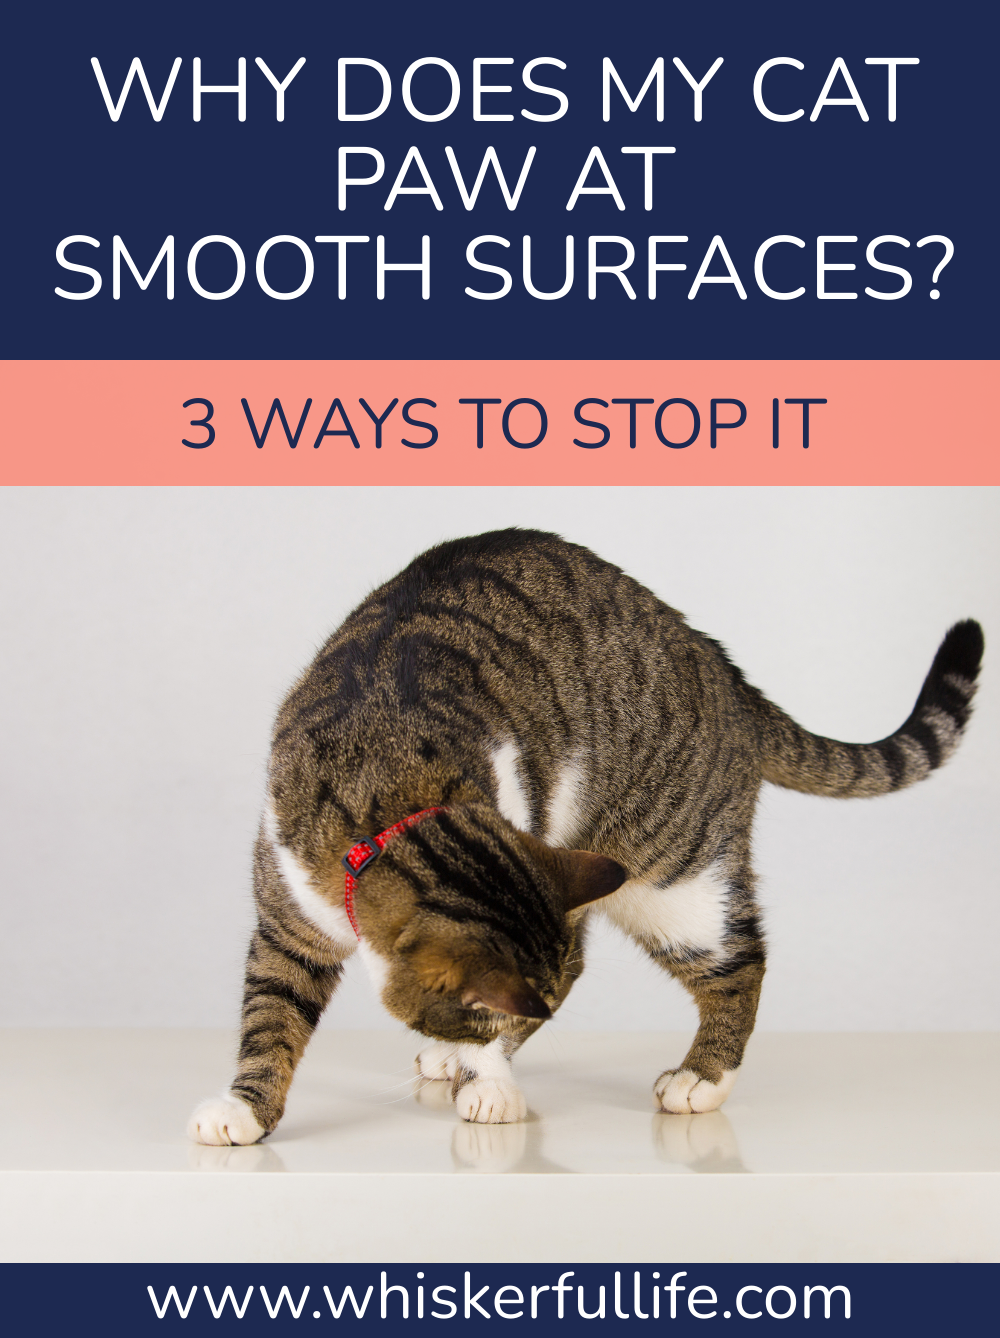 Why Does My Cat Paw at Smooth Surfaces & How to Stop It